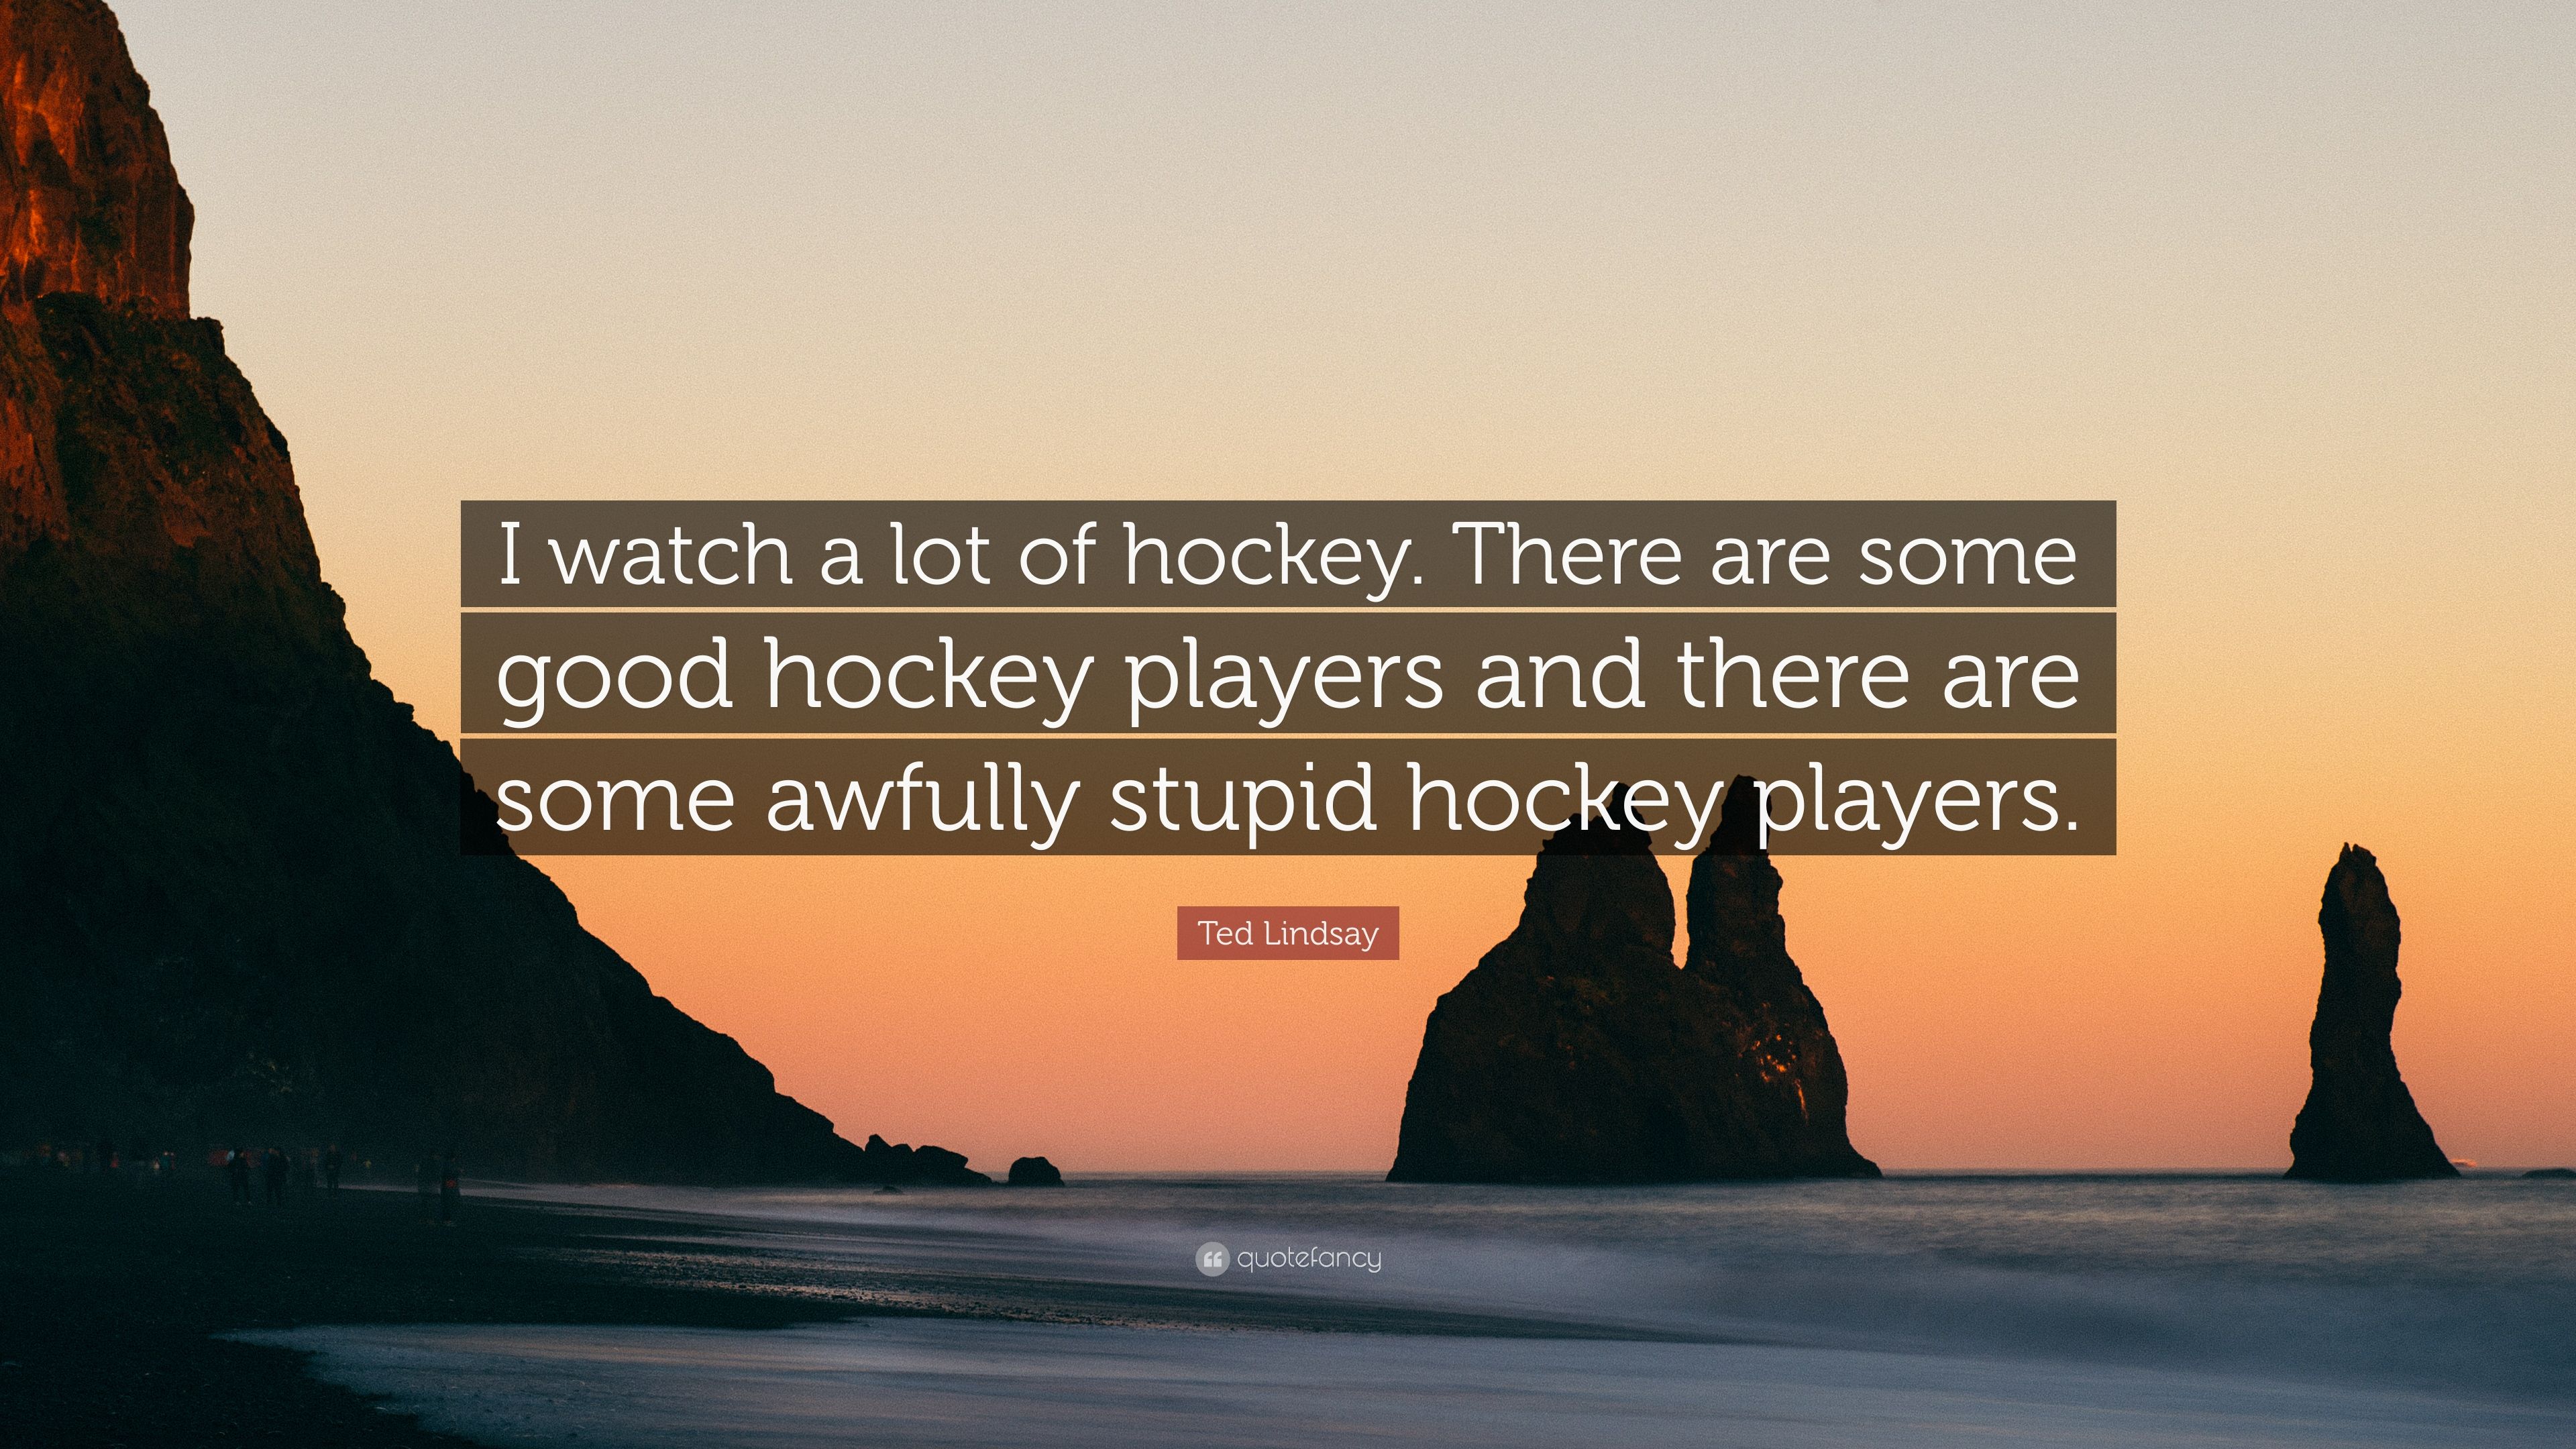 Ted Lindsay Quote: “I watch a lot of hockey. There are some good